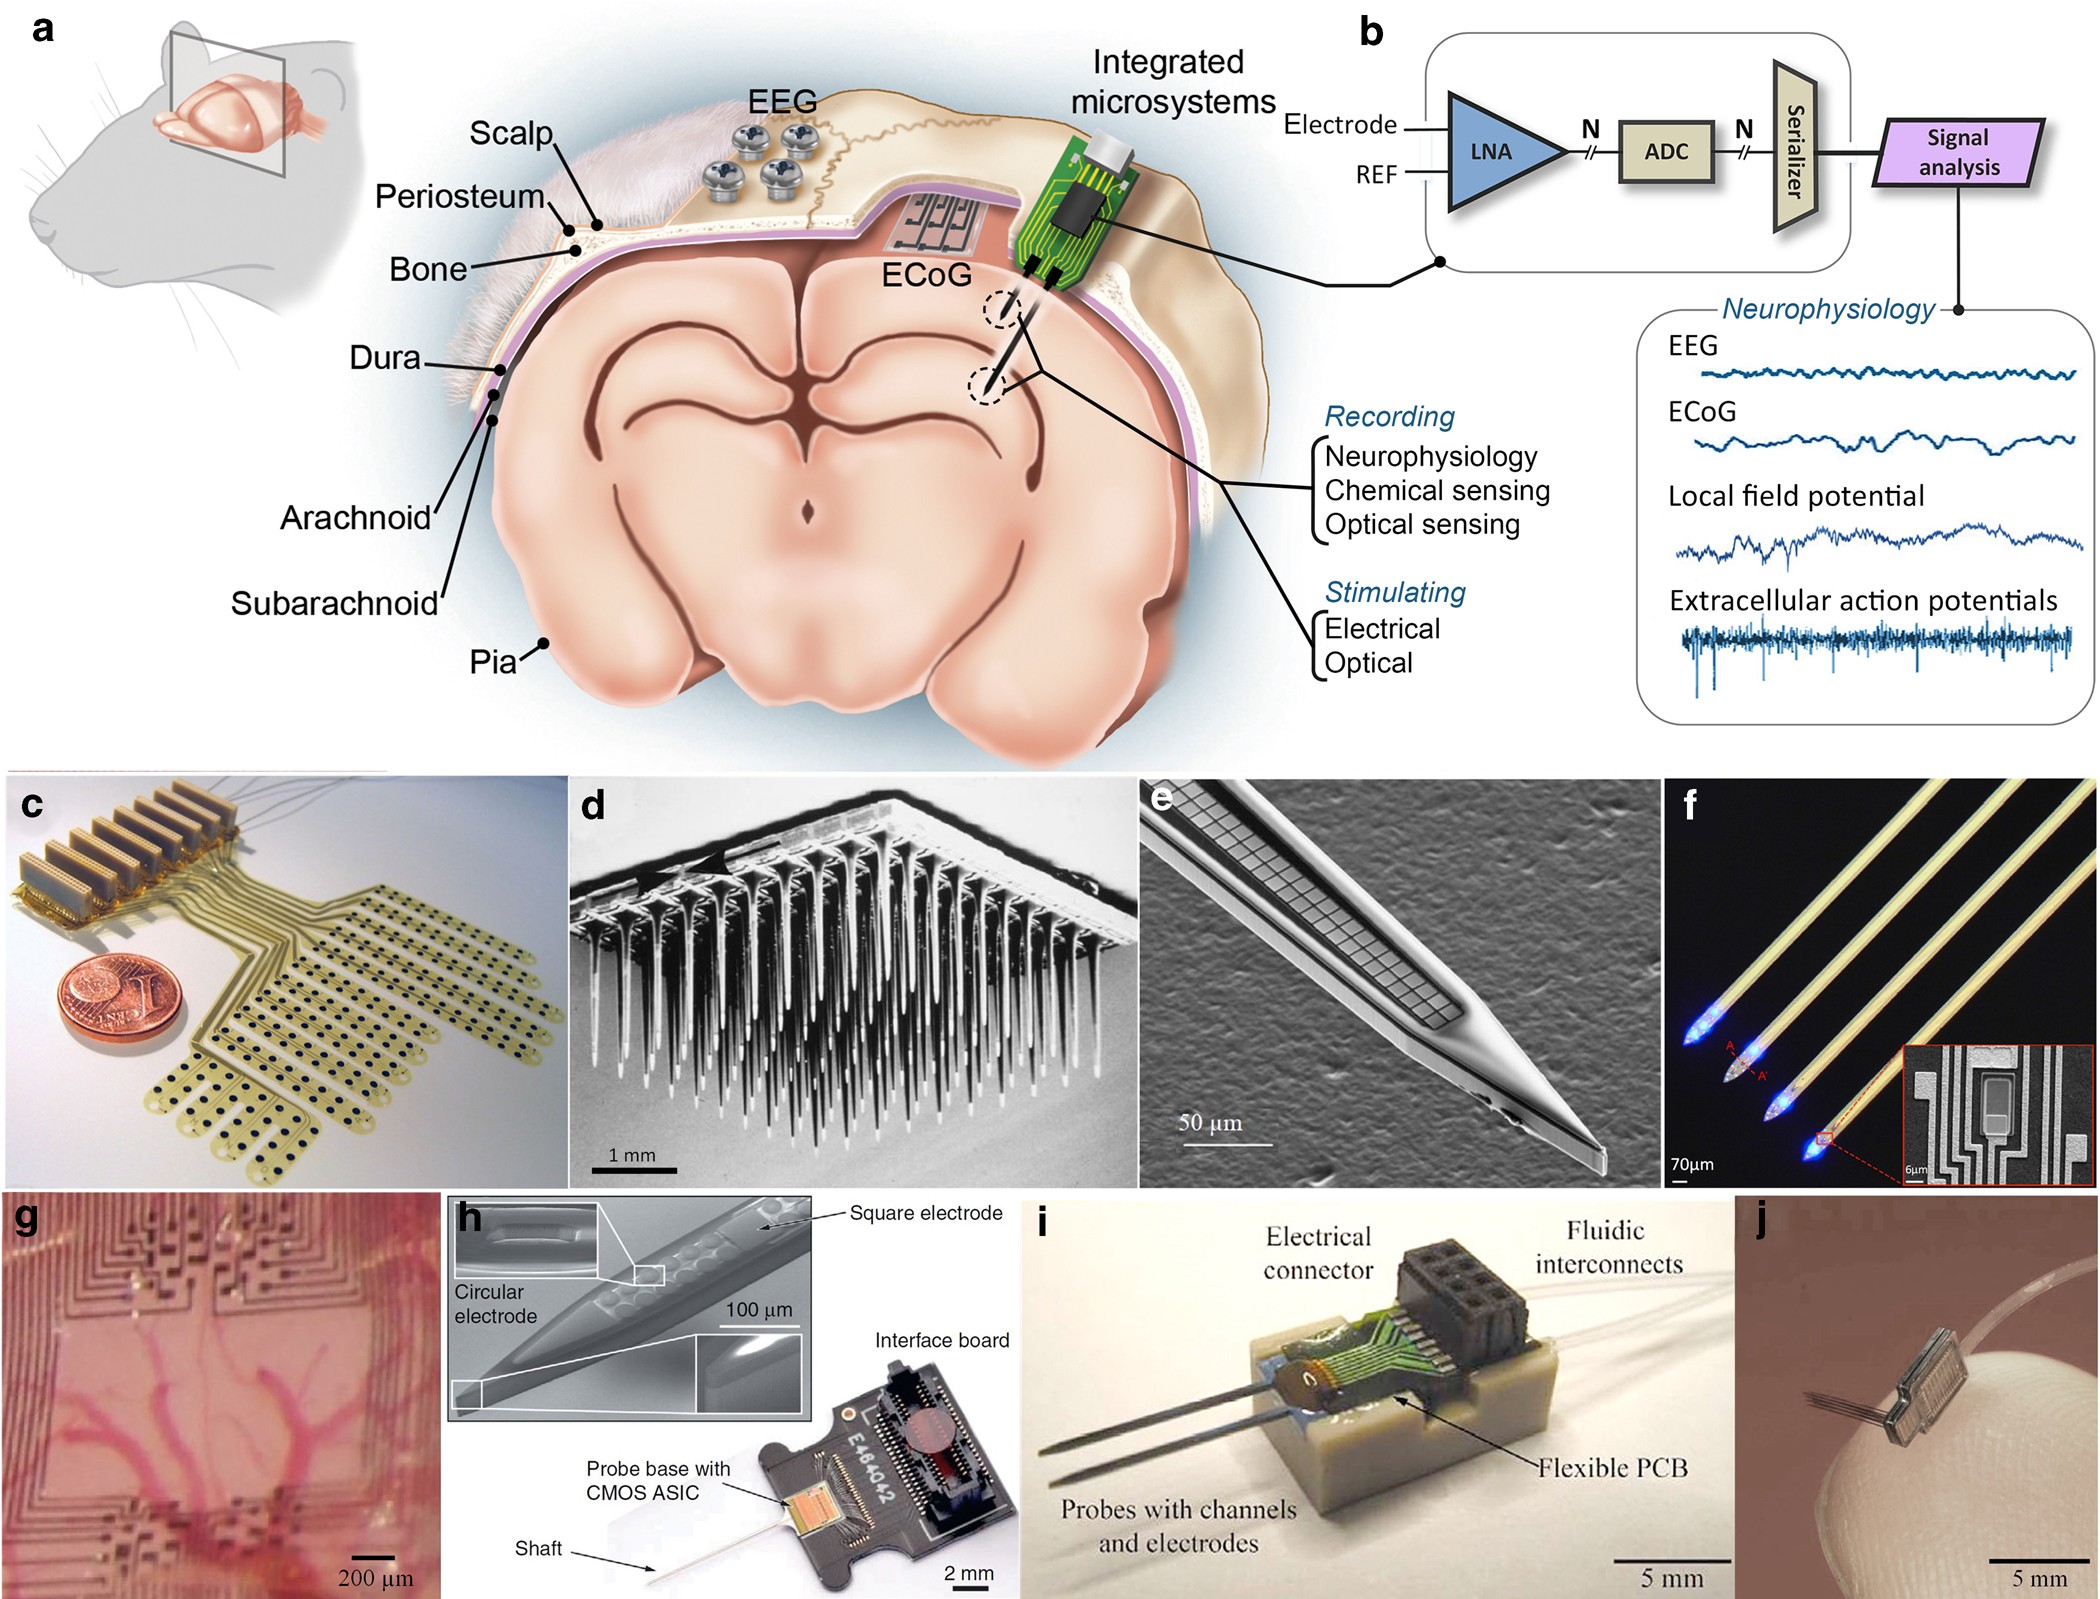 State-of-the-art MEMS and microsystem tools for brain research |  Microsystems & Nanoengineering